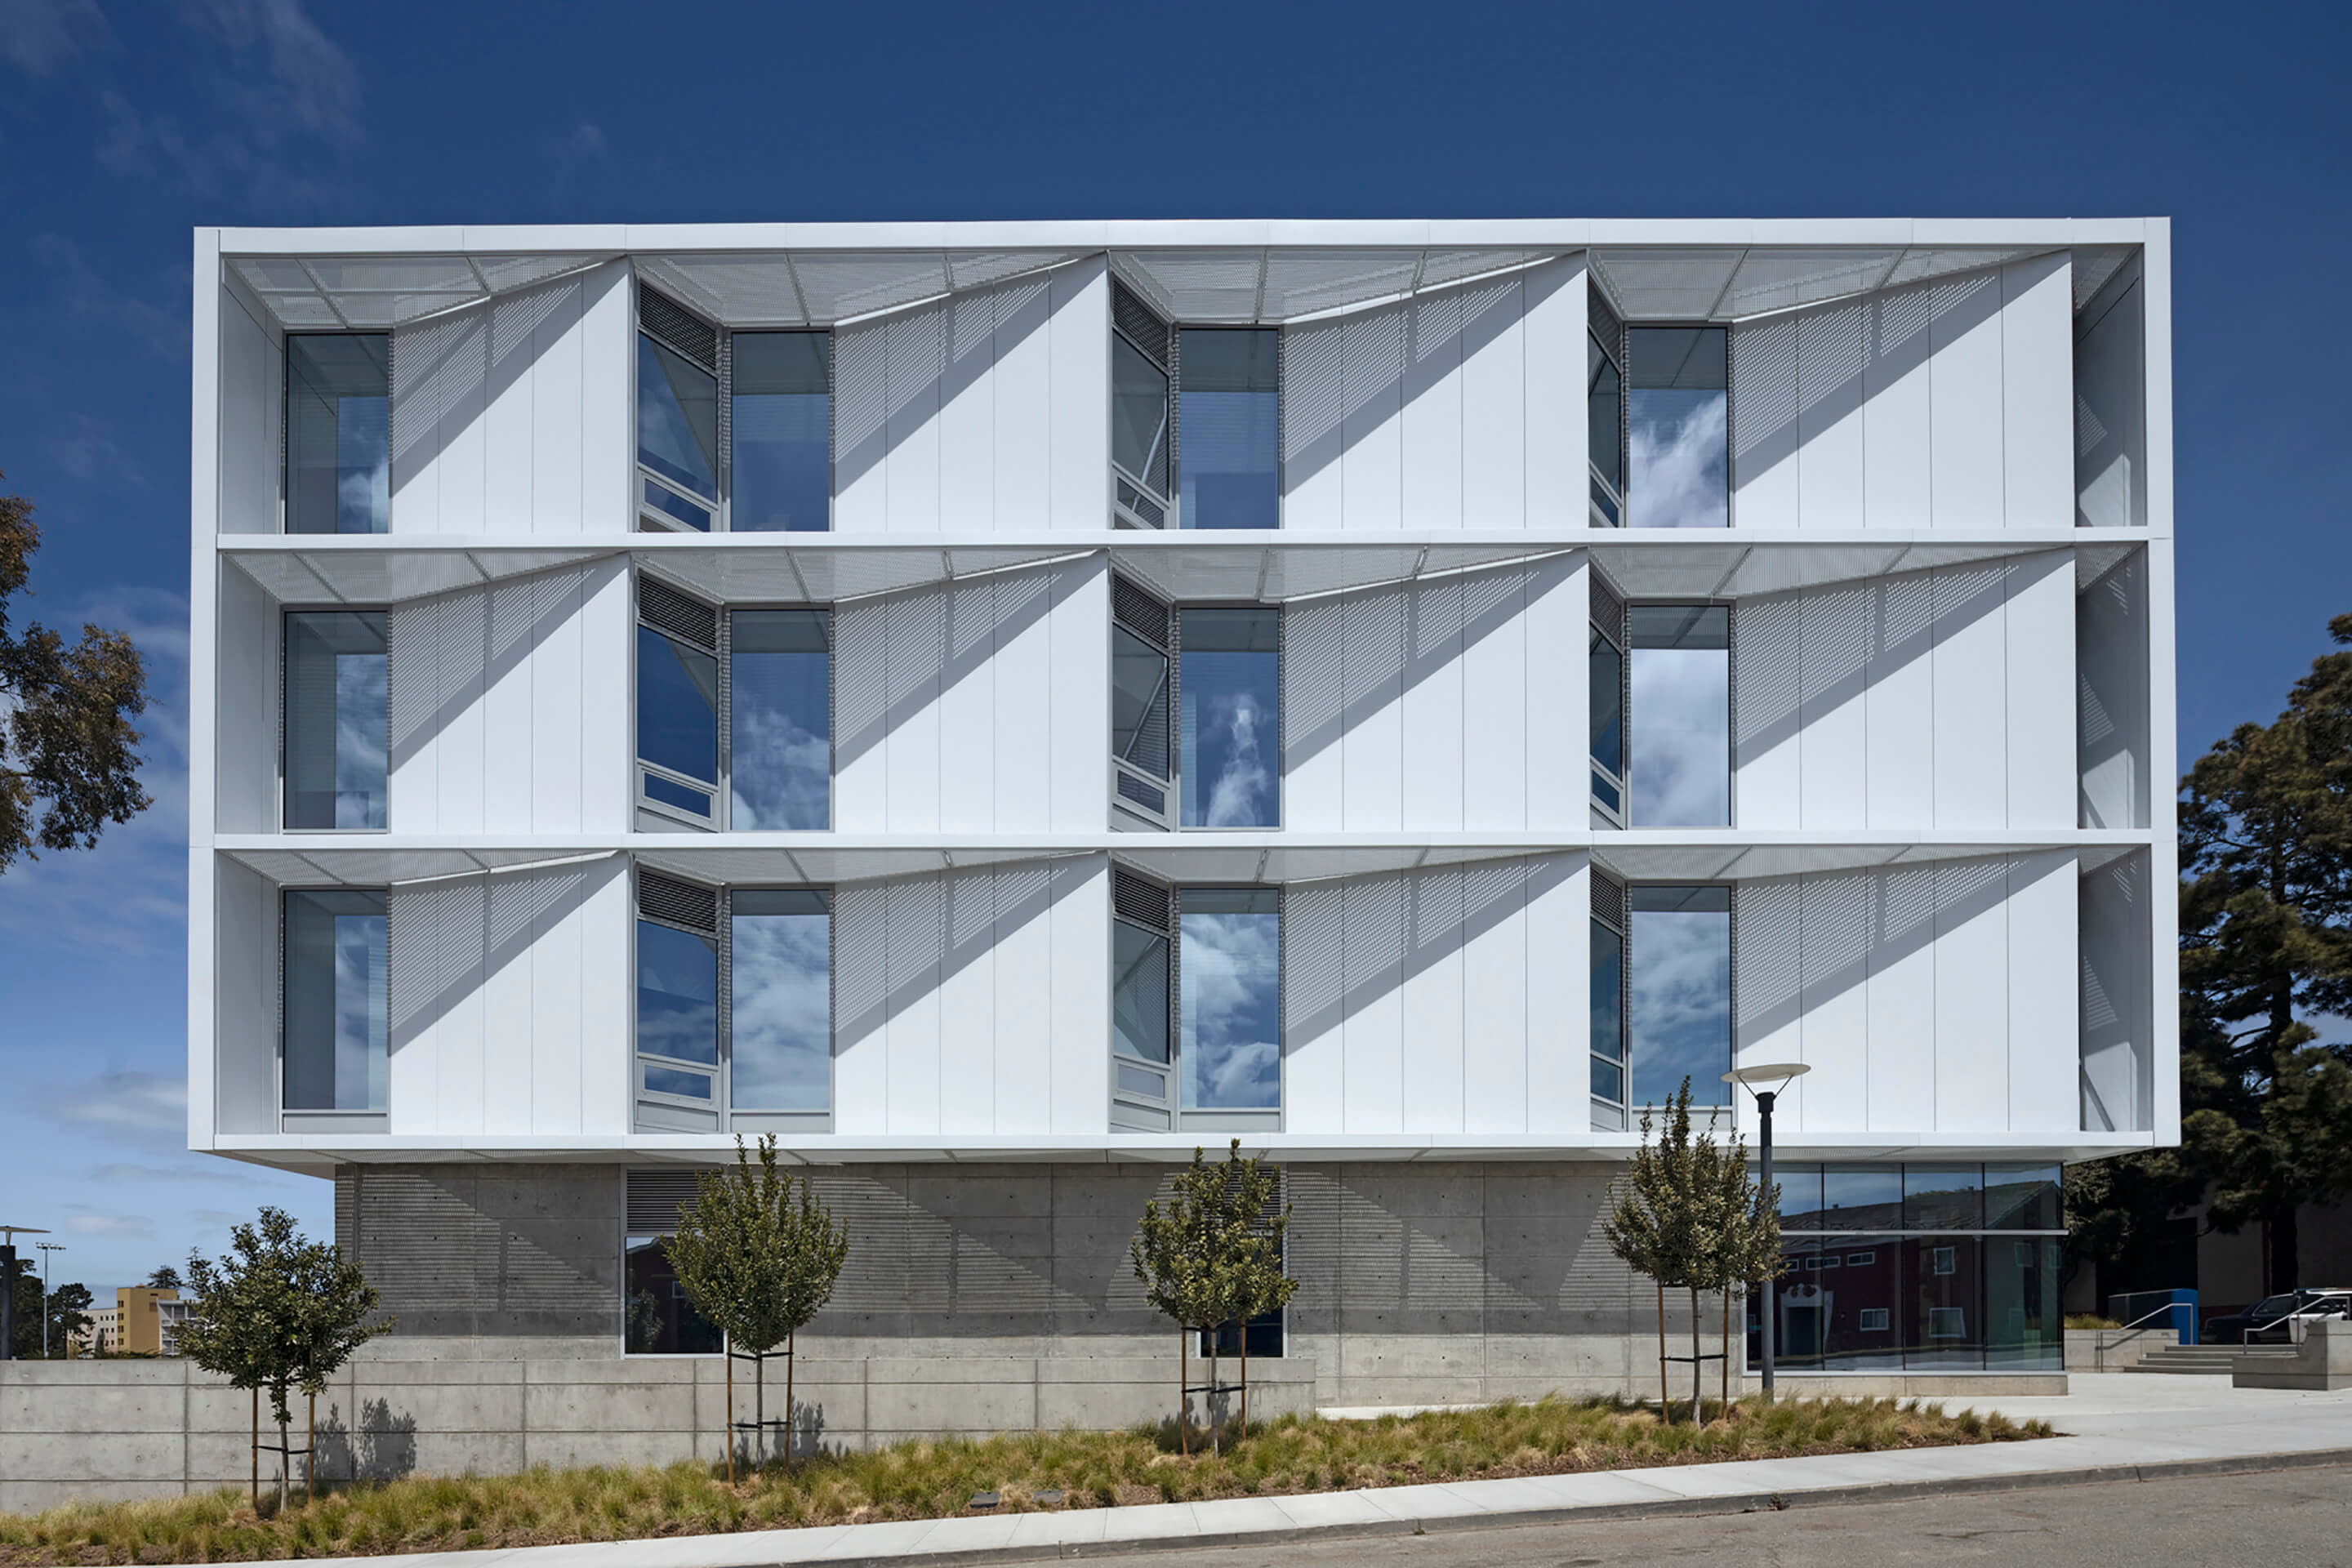 Rotated boxes on a facade allow ample daylight in